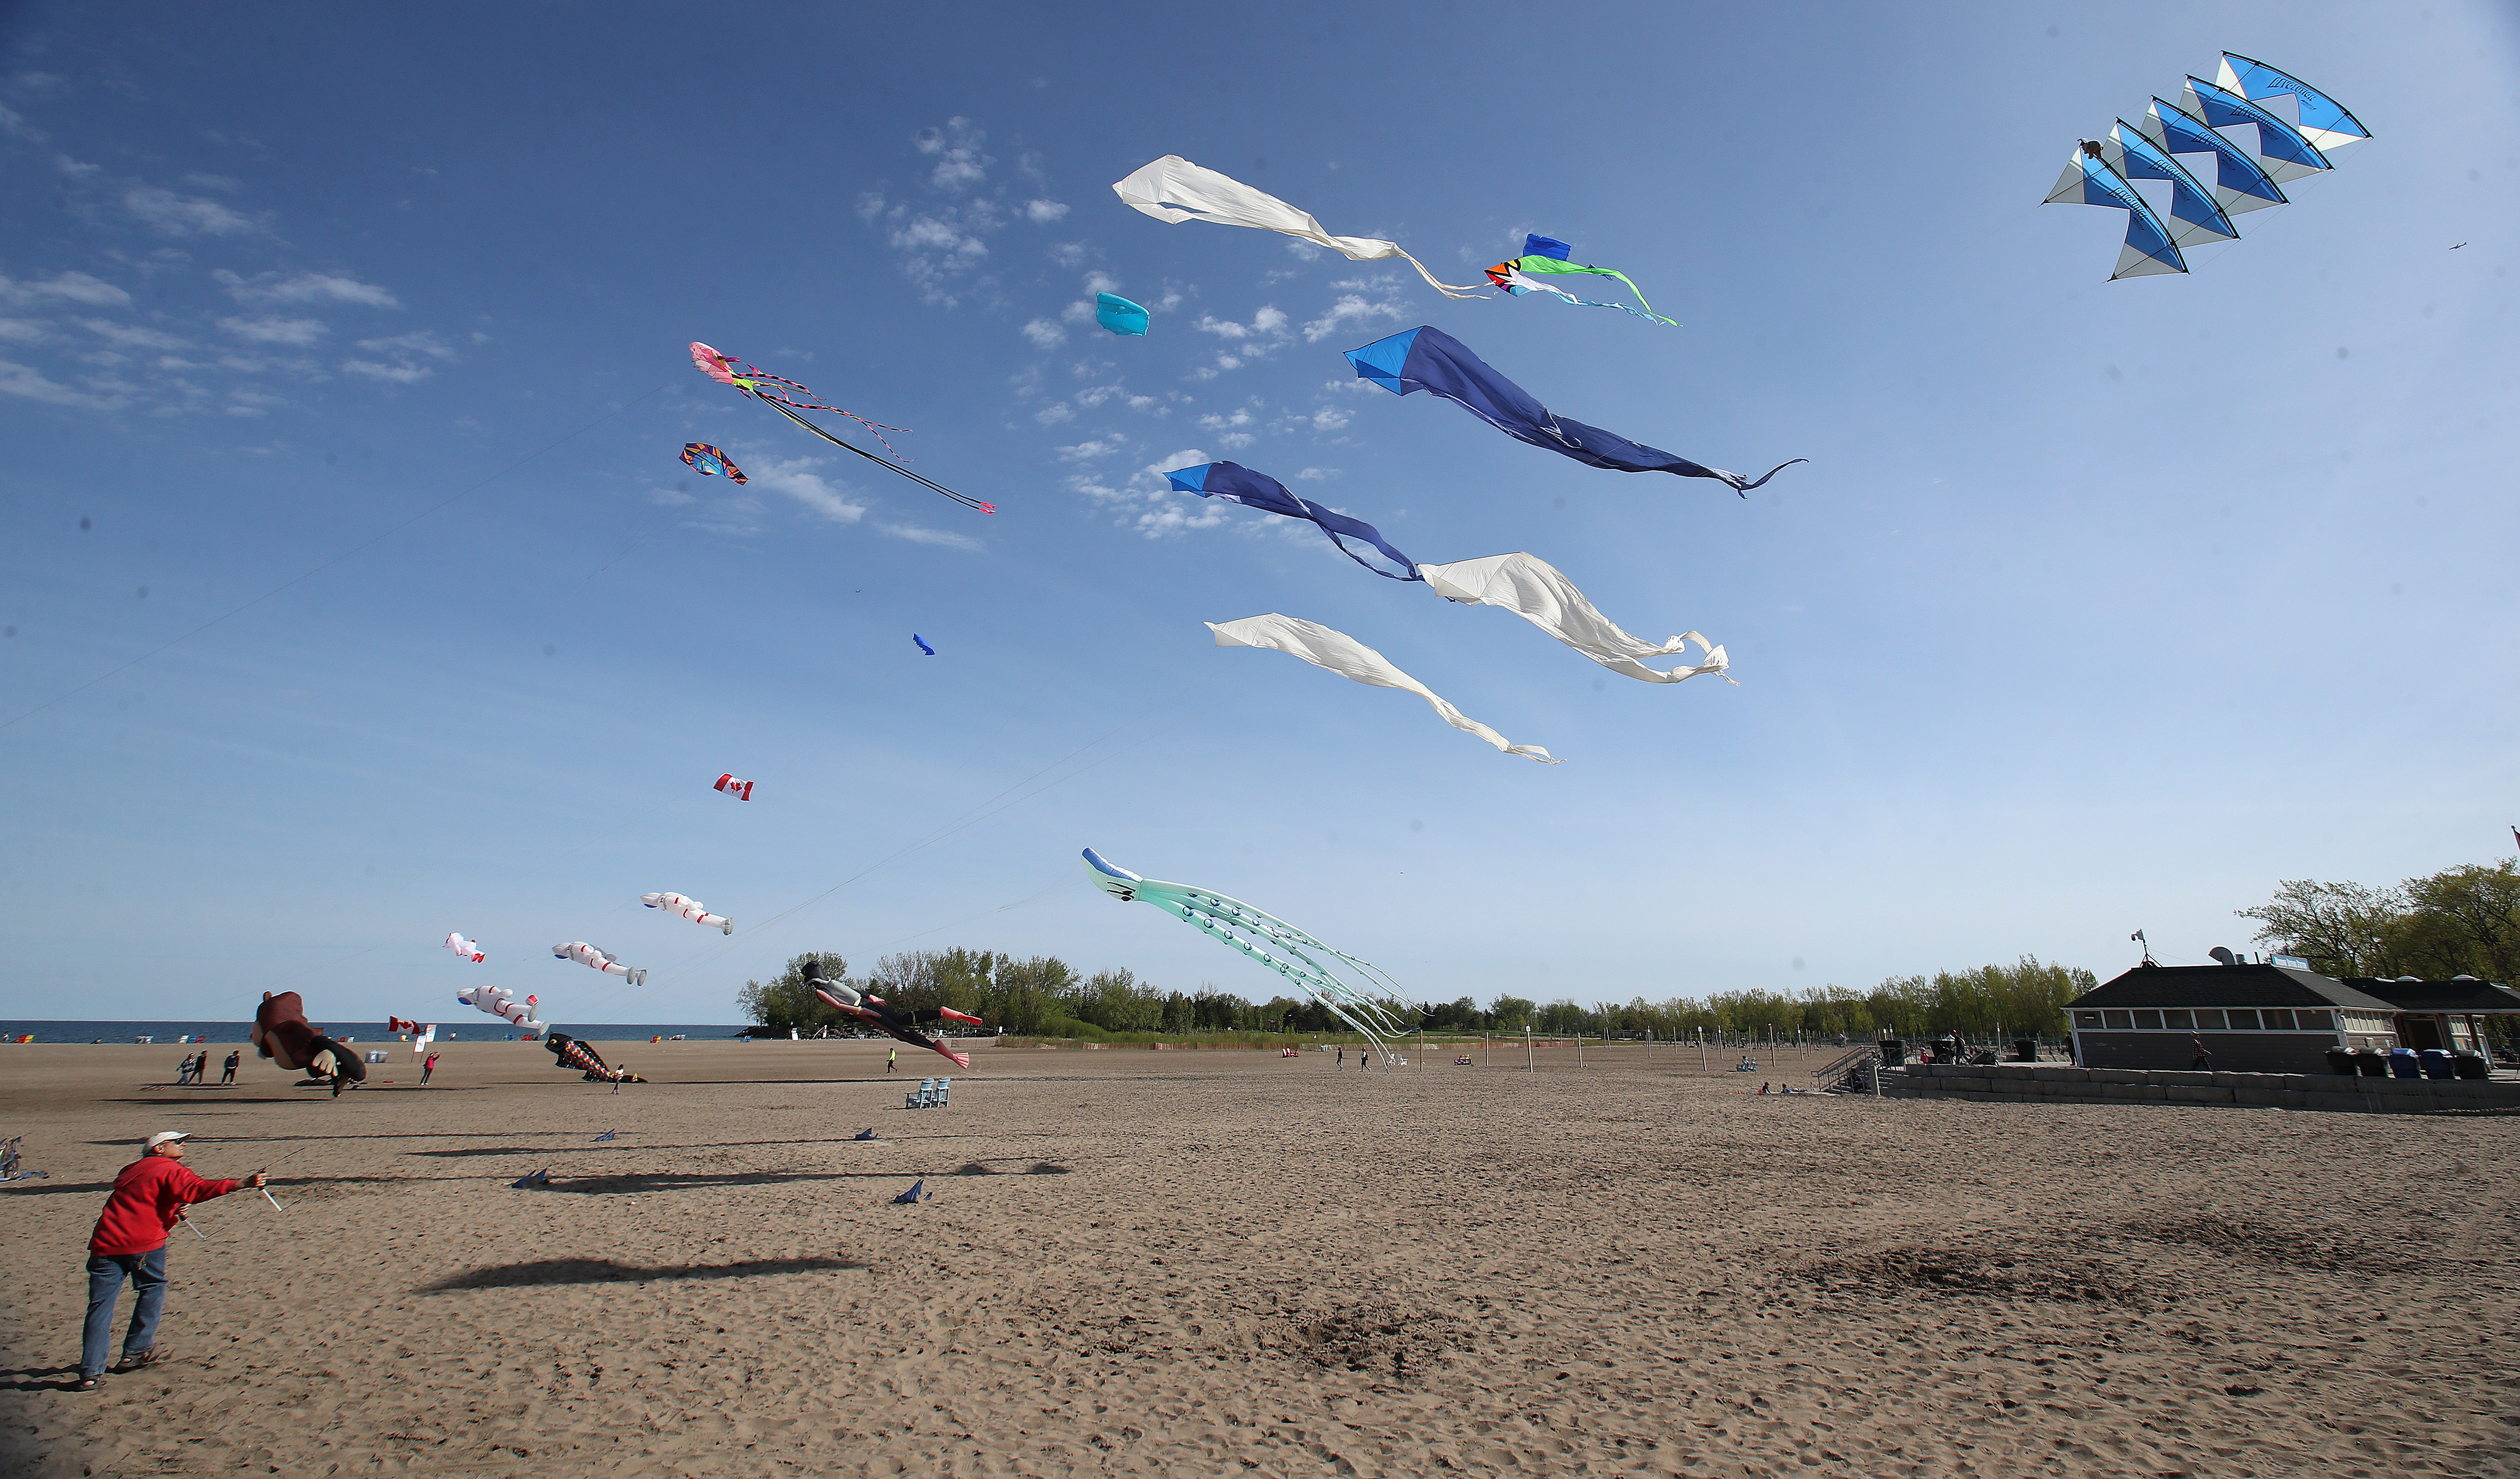 When the wind is right, members of Toronto Kite Flyers gather at the Woodbine Beach to fly their kites, high above the beach